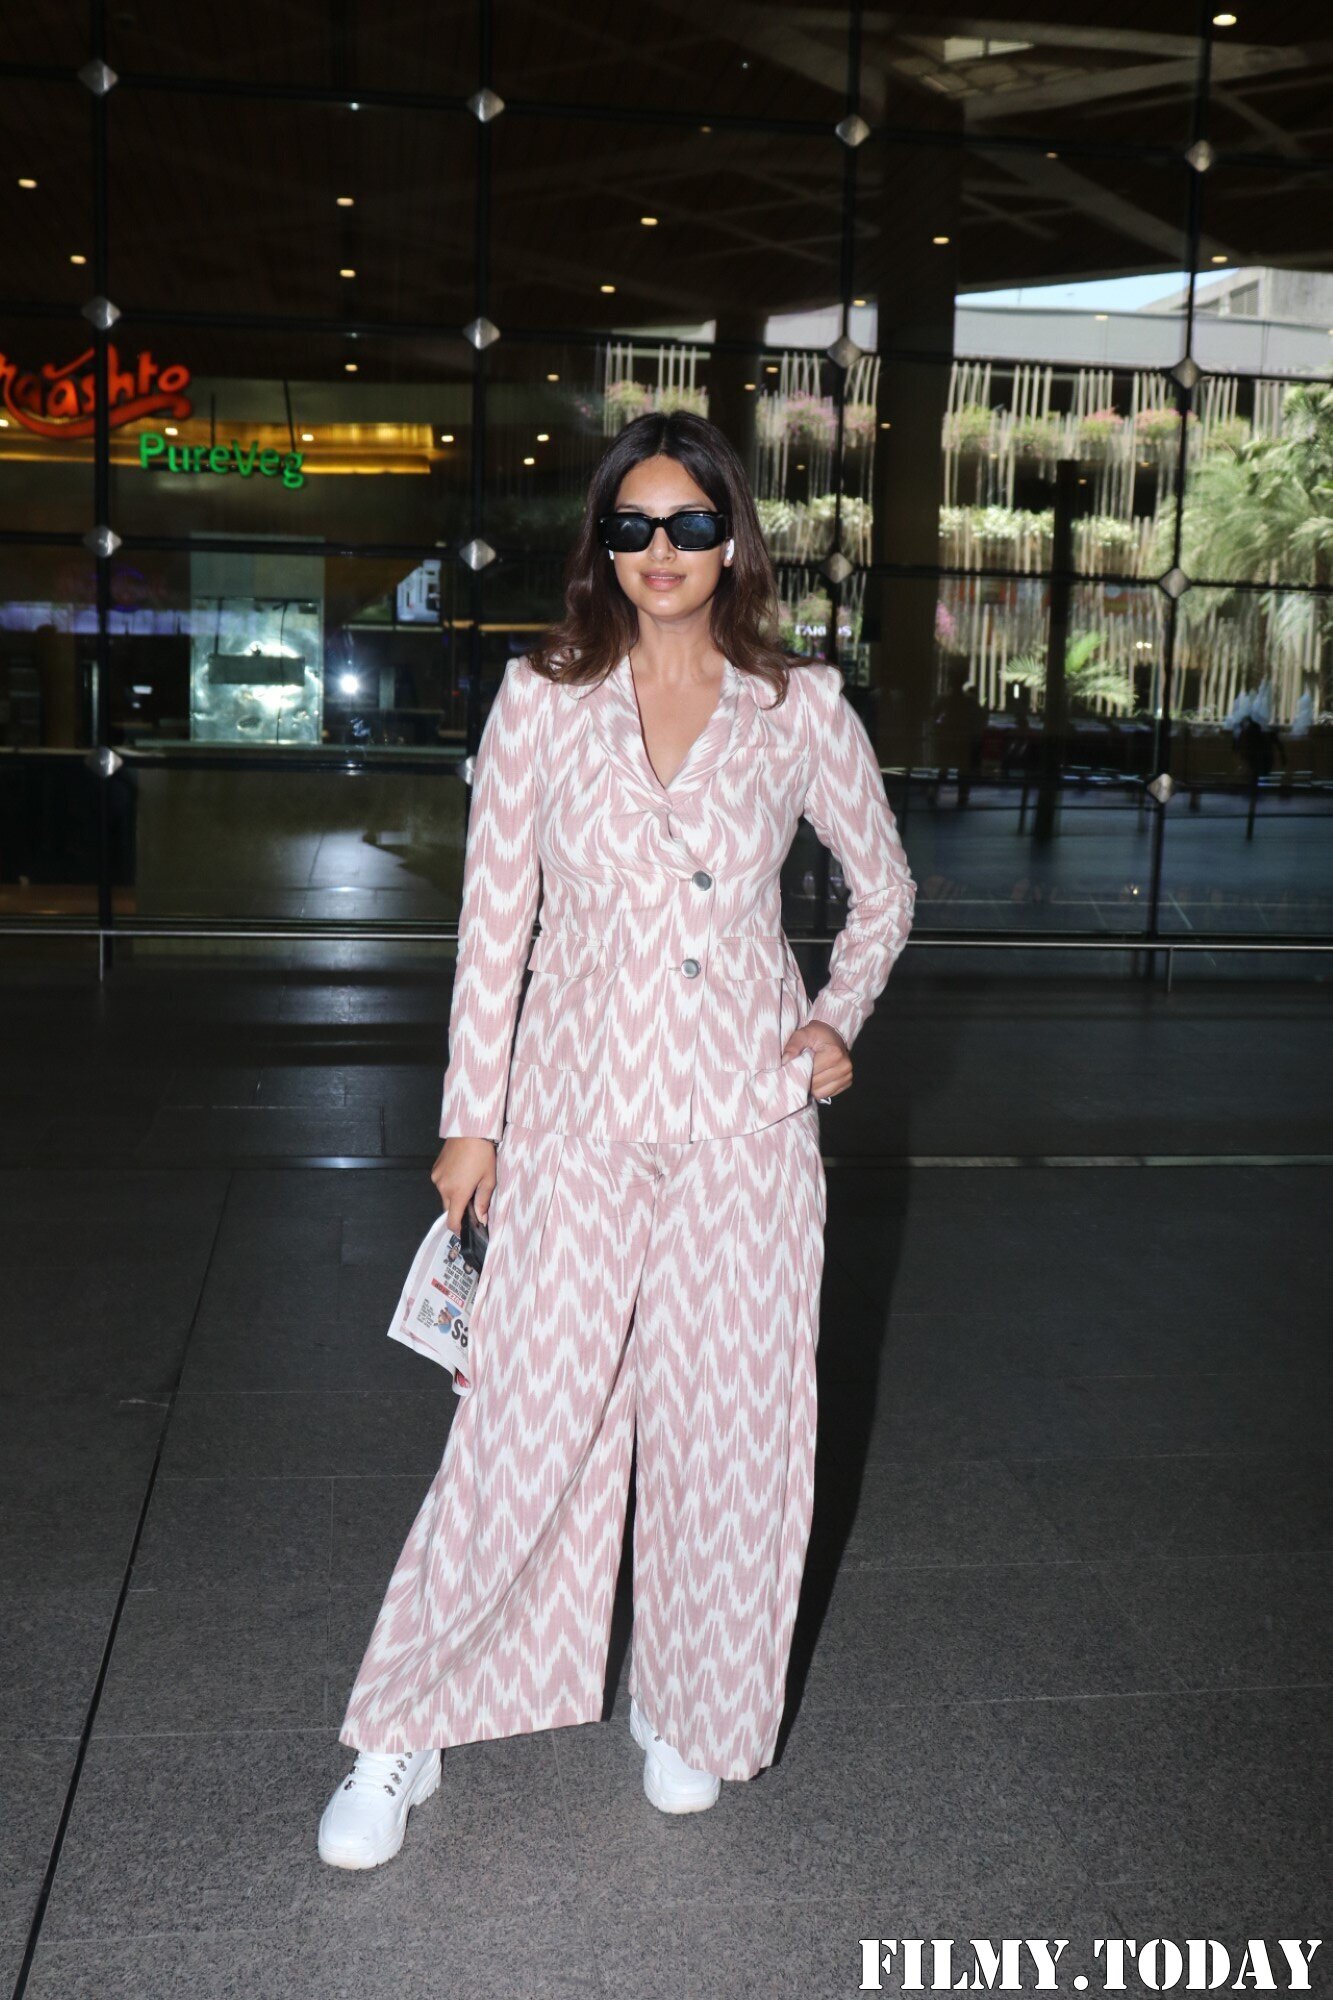 Harnaaz Kaur Sandhu - Photos: Celebs Spotted At Airport | Picture 1867348